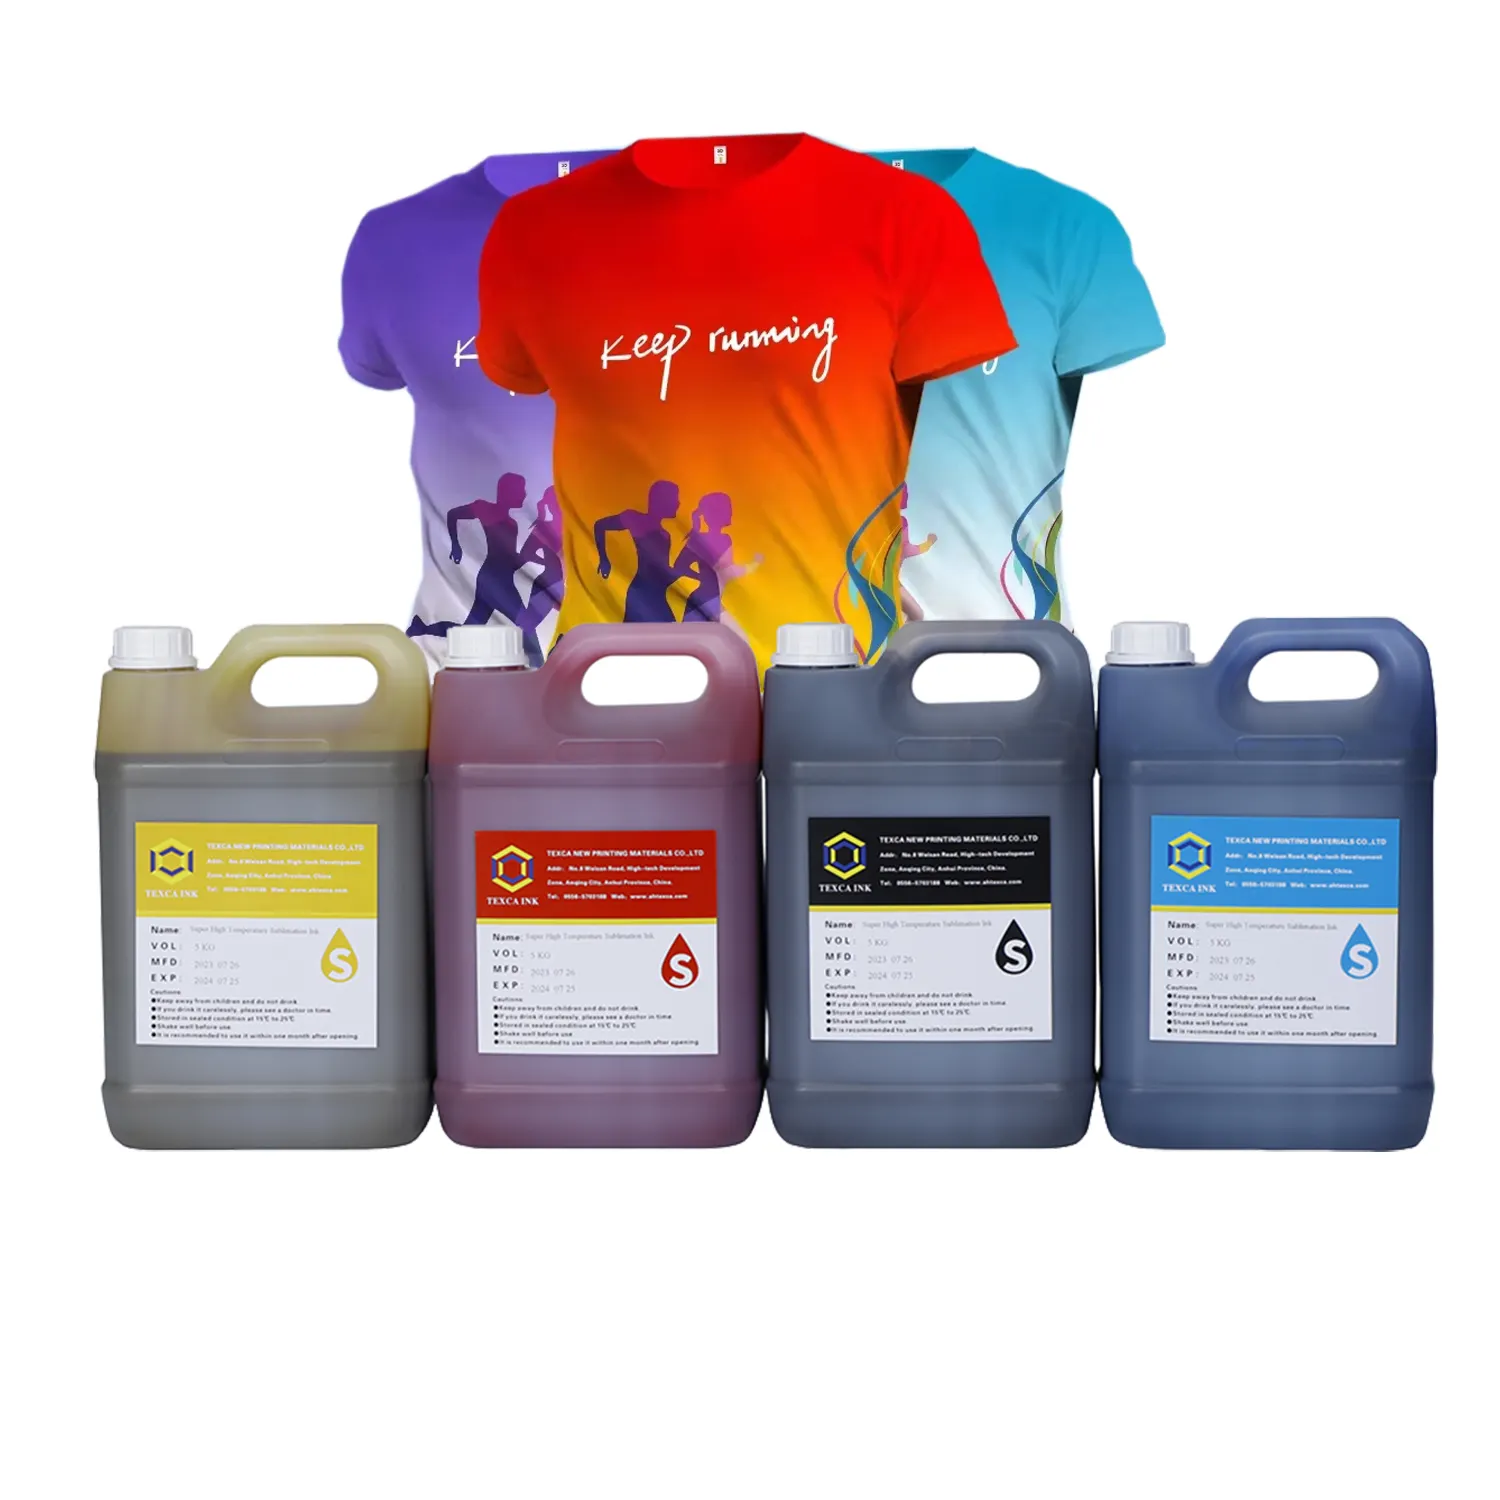 With Big Promotion Textile Printing Ink Polyester Printer Textile Digital Printing Soy Ink For Epson S3200 I3200